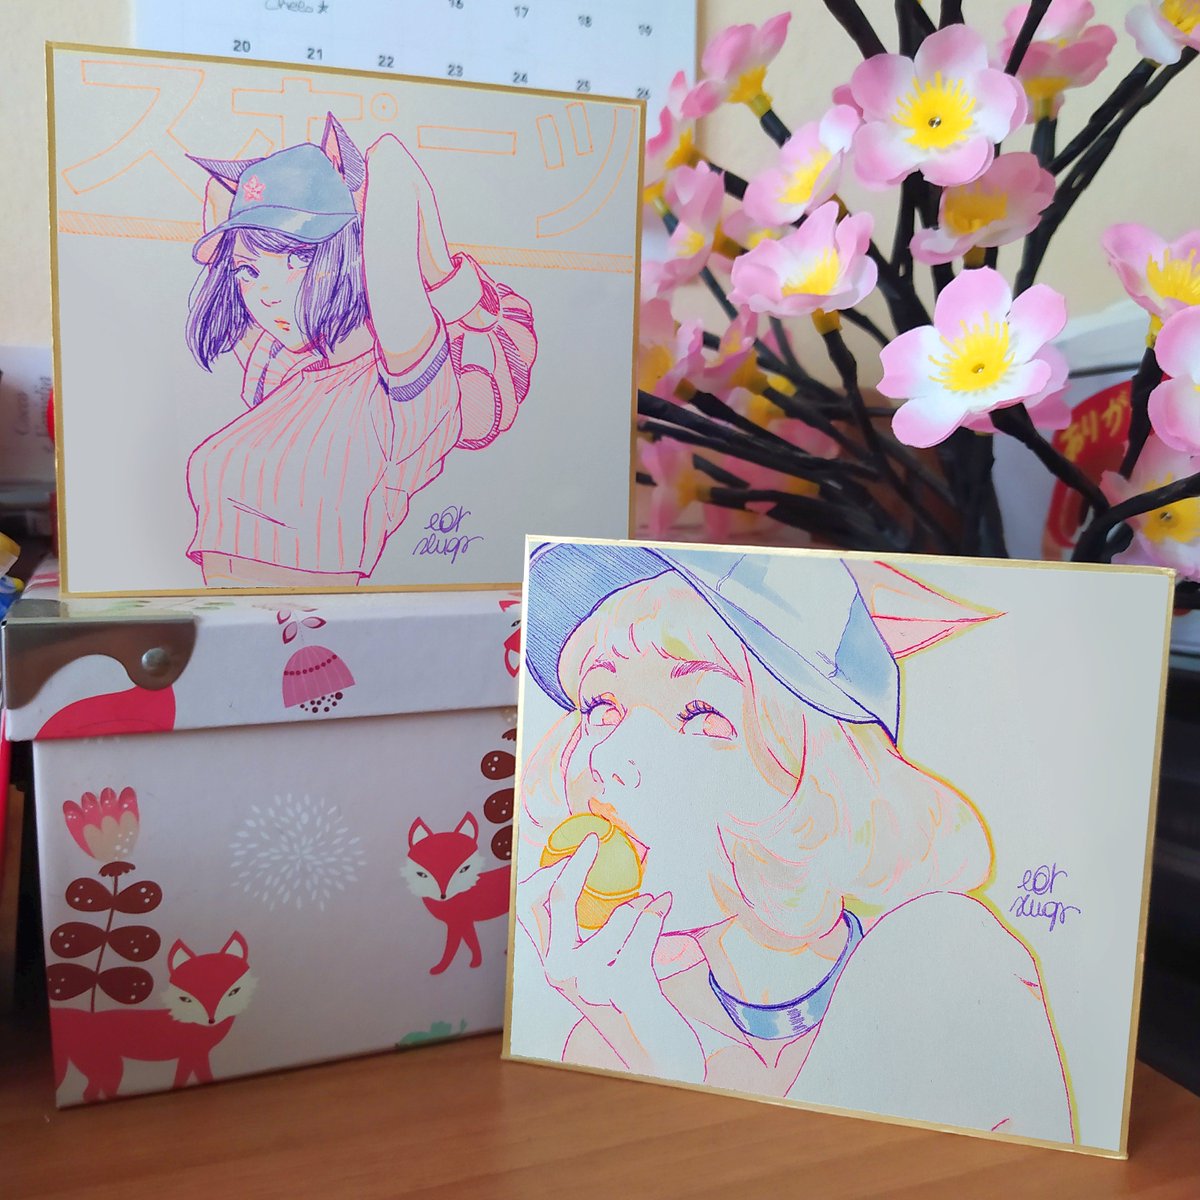 ✨WIN A SHIKISHI✨
@SukebanNYC is hosting a 24 hours Instagram giveaway to win one of the shikishis I've made for them!! ? Each shikishi comes with a set of "Holo Catgirls" stickers ??

Enter here: https://t.co/iRPZKxhgEF 